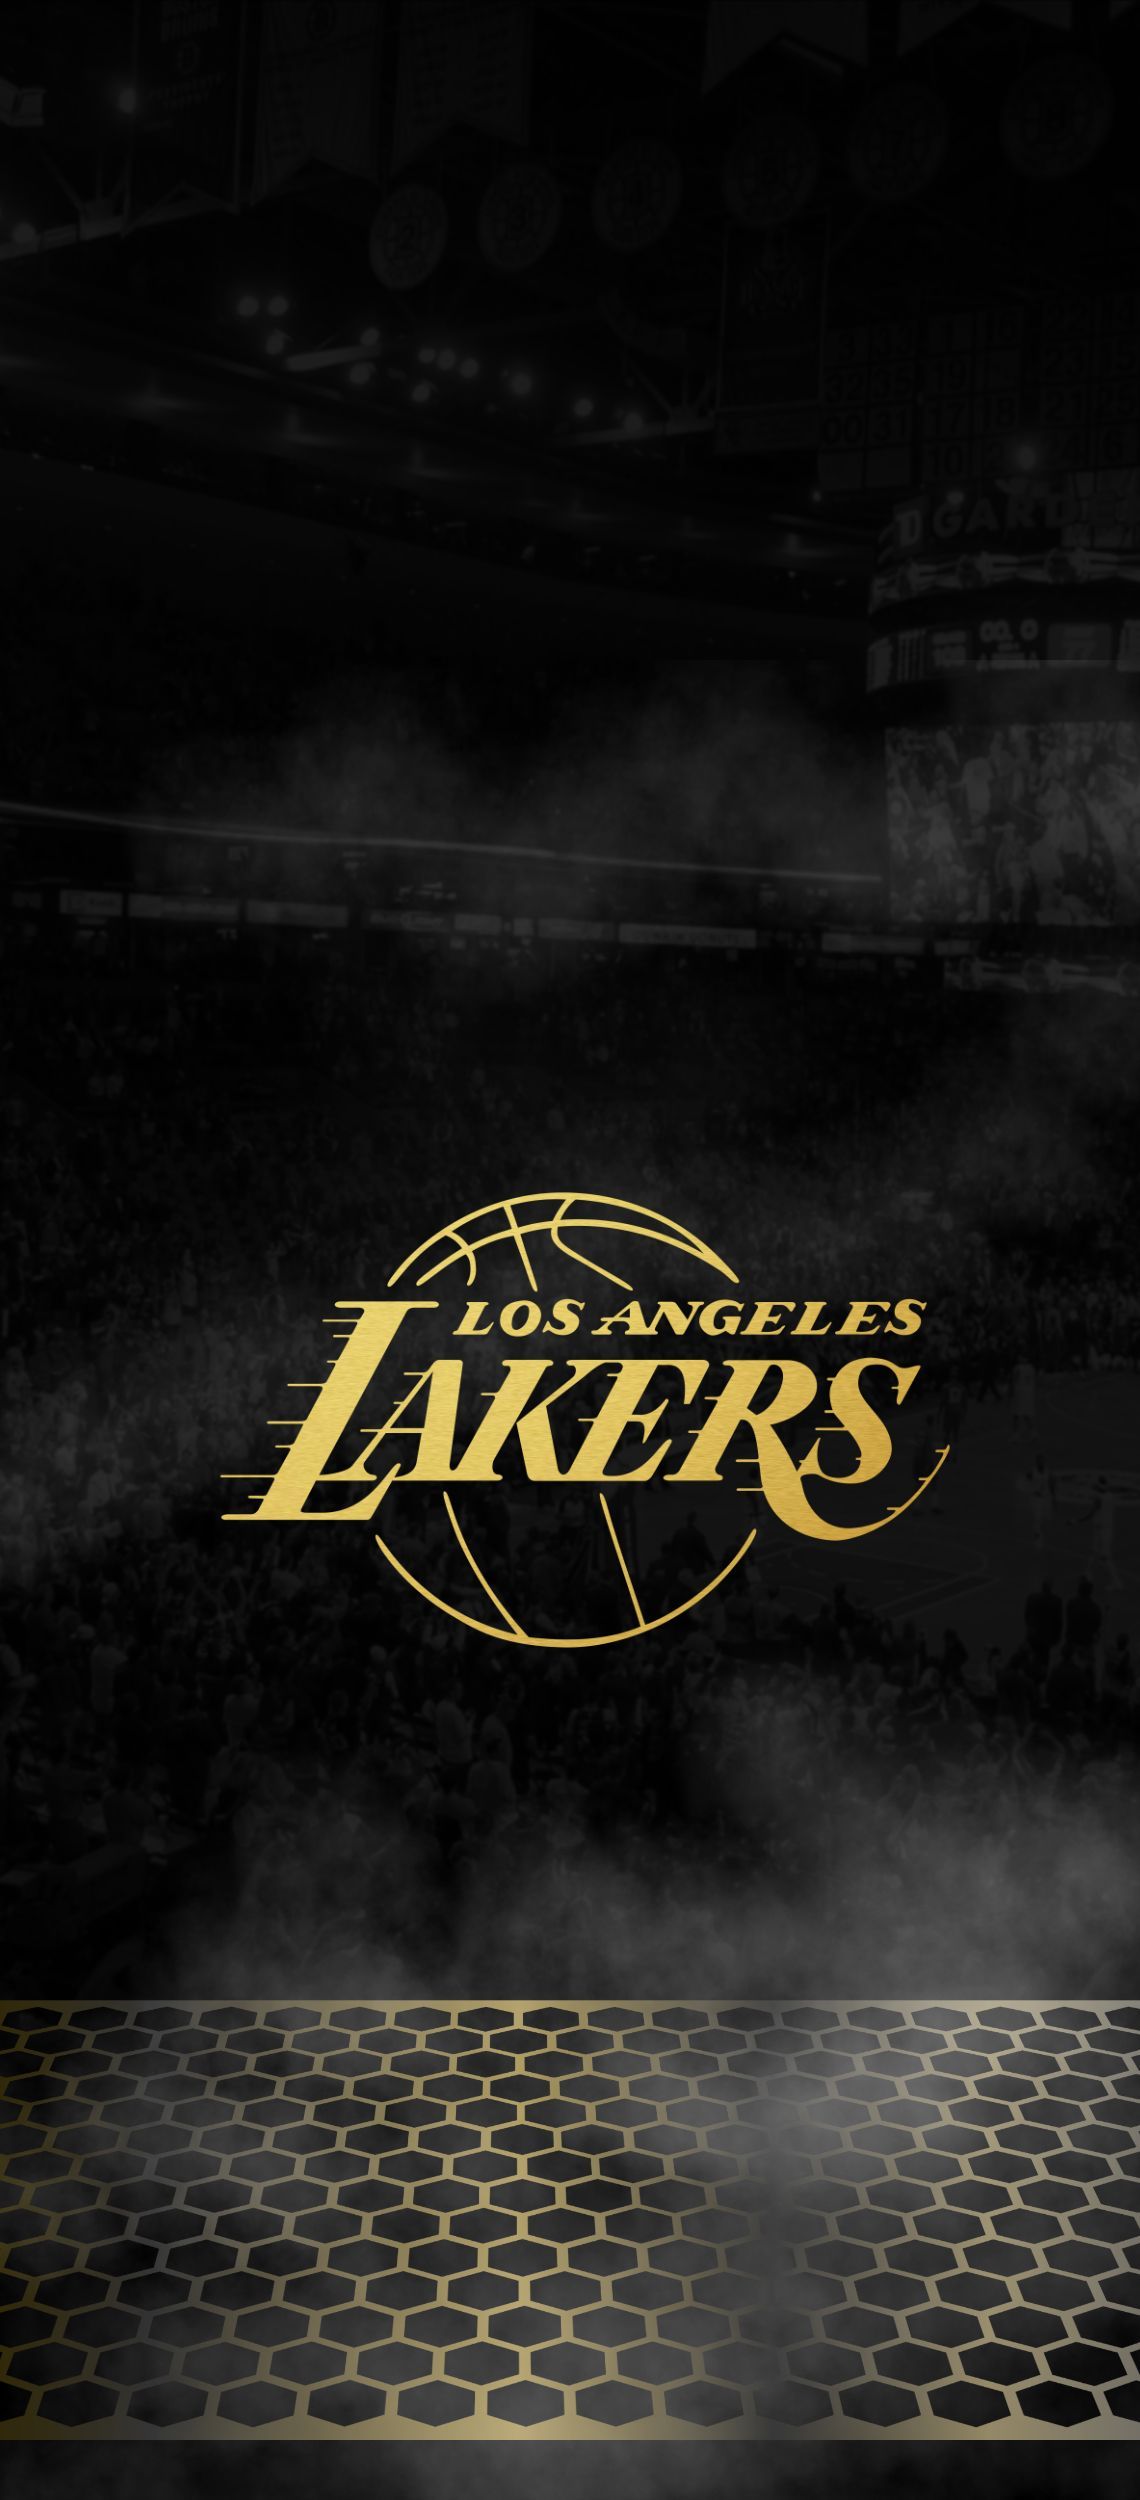 NBA Team Los Angeles Lakers iPhone Background Wallpaper